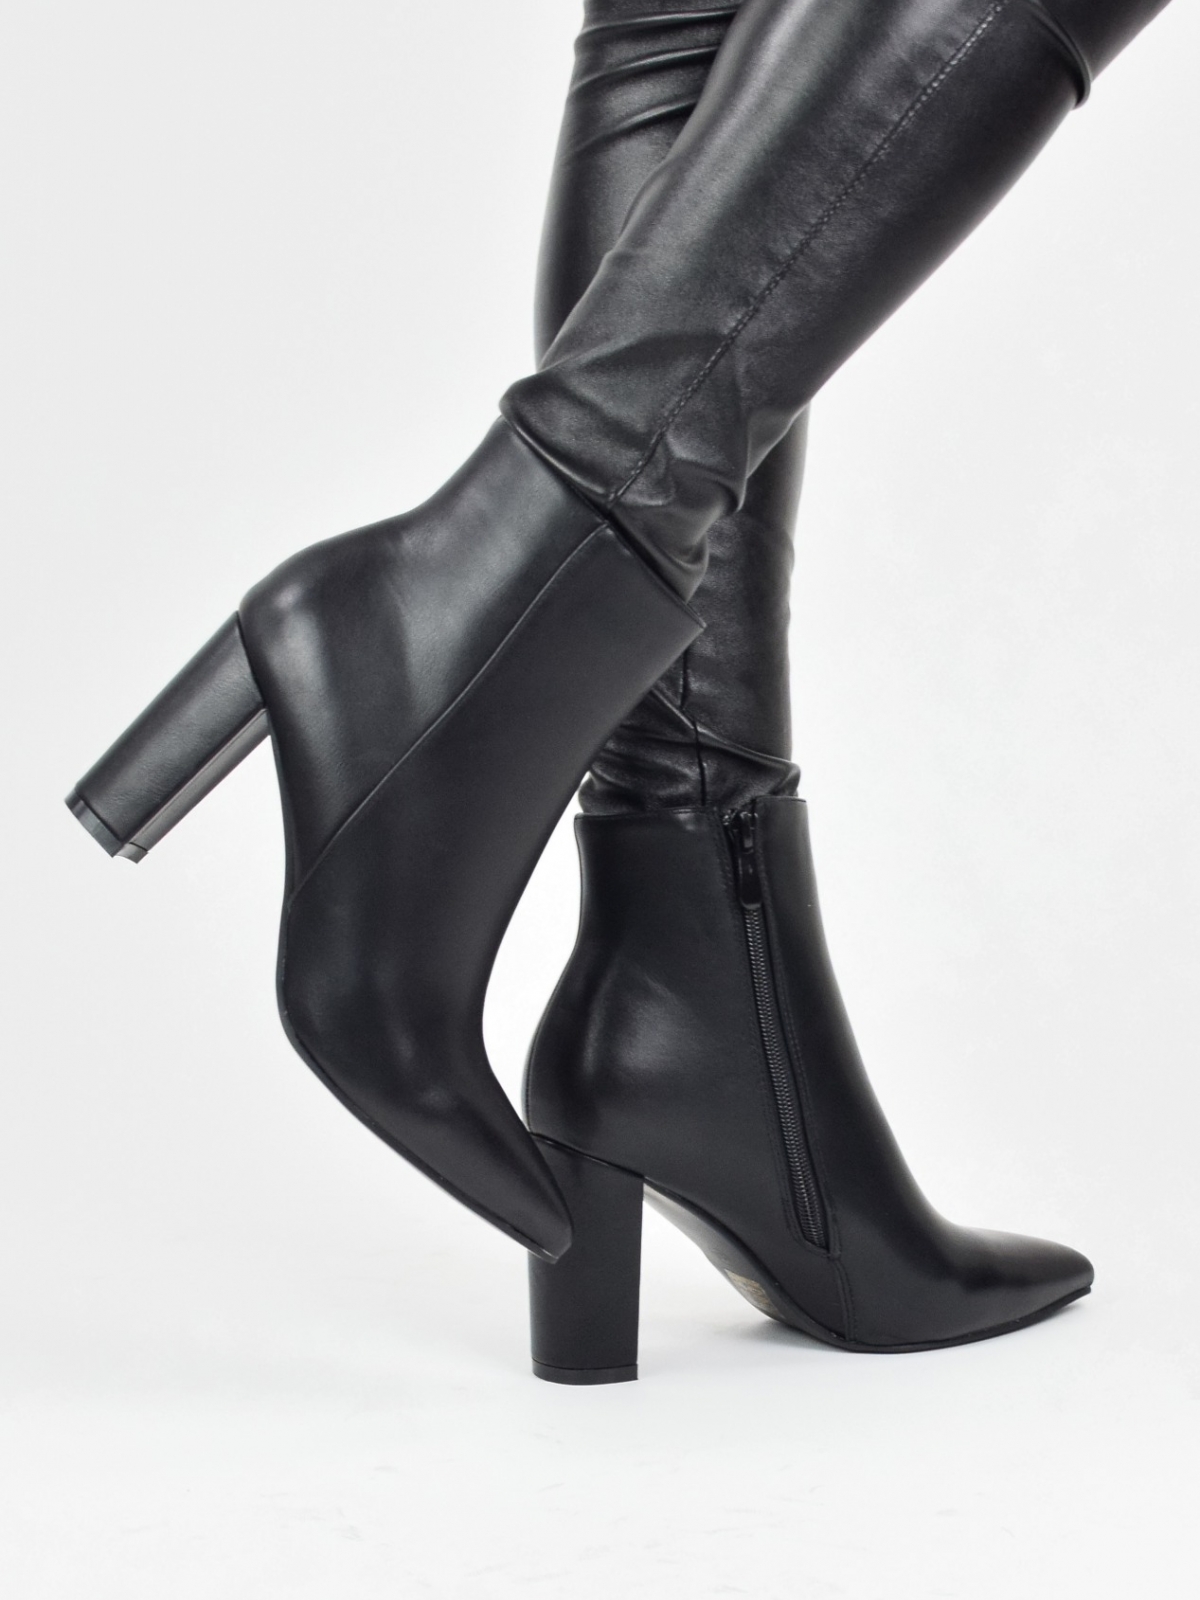 High heeled lace up ankle boots in black